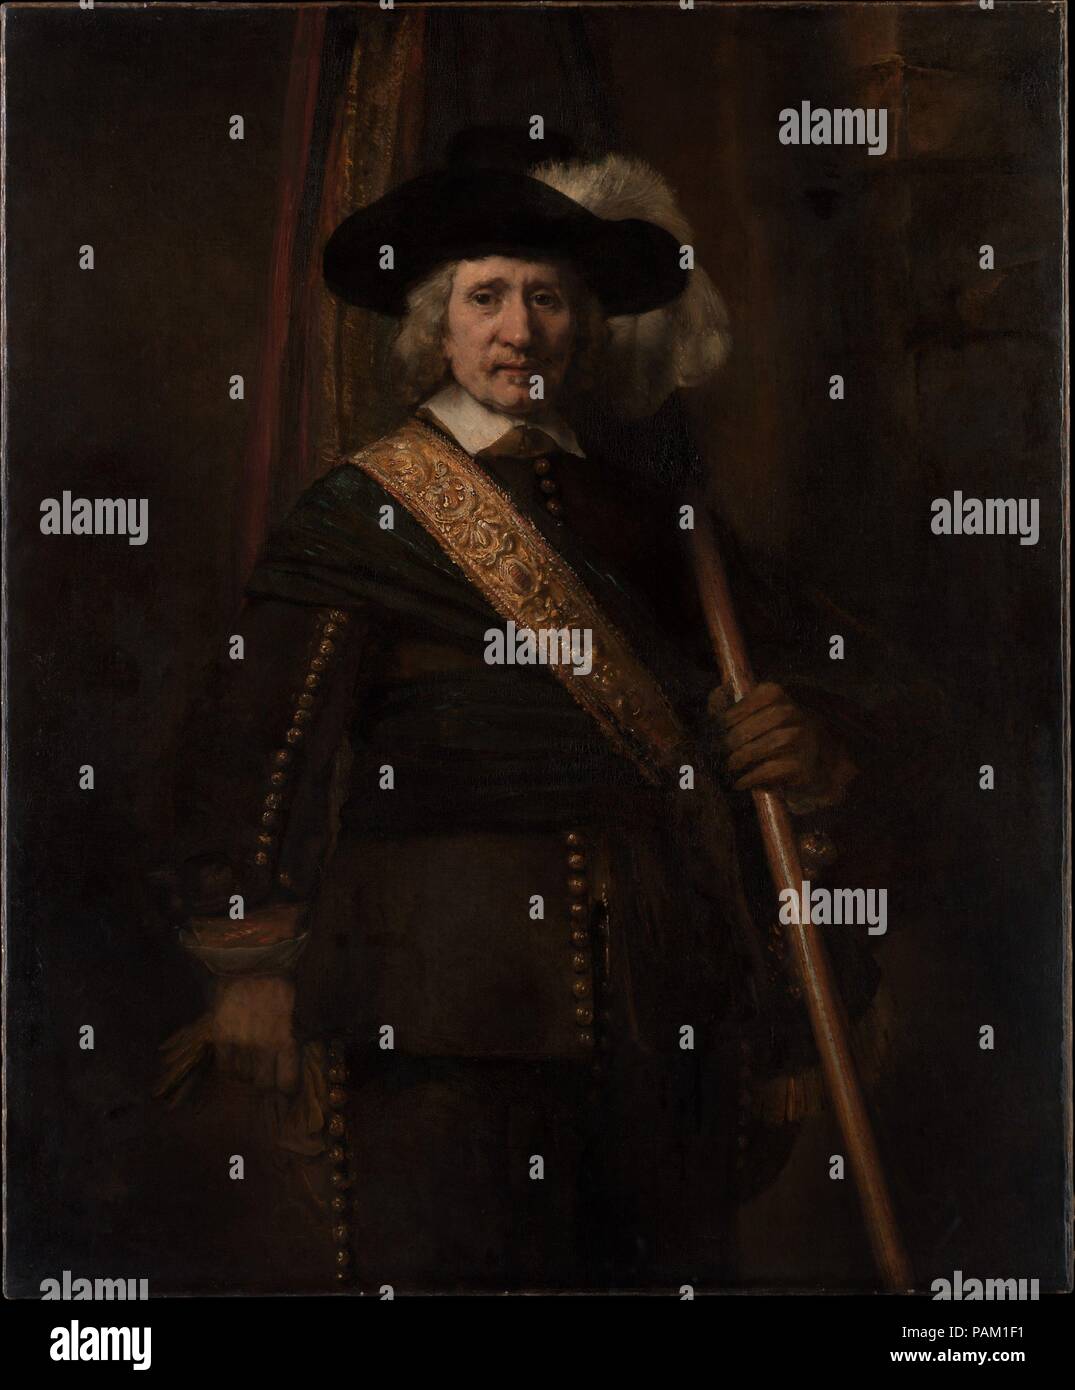 The Standard Bearer (Floris Soop, 1604-1657). Artist: Rembrandt (Rembrandt van Rijn) (Dutch, Leiden 1606-1669 Amsterdam). Dimensions: 55 1/4 x 45 1/4in. (140.3 x 114.9cm). Date: 1654.  The flag, the plume in the hat, and the tooled leather baldric (sword-belt) indicate that the figure is an ensign in one of Amsterdam's civic guard companies. He is almost certainly Floris Soop, a wealthy bachelor whose estate included 140 paintings. Rembrandt conveys a strong sense of character and reveals extraordinary skill in the vigorously modeled face, the thick hair, and costume details. The impressions o Stock Photo